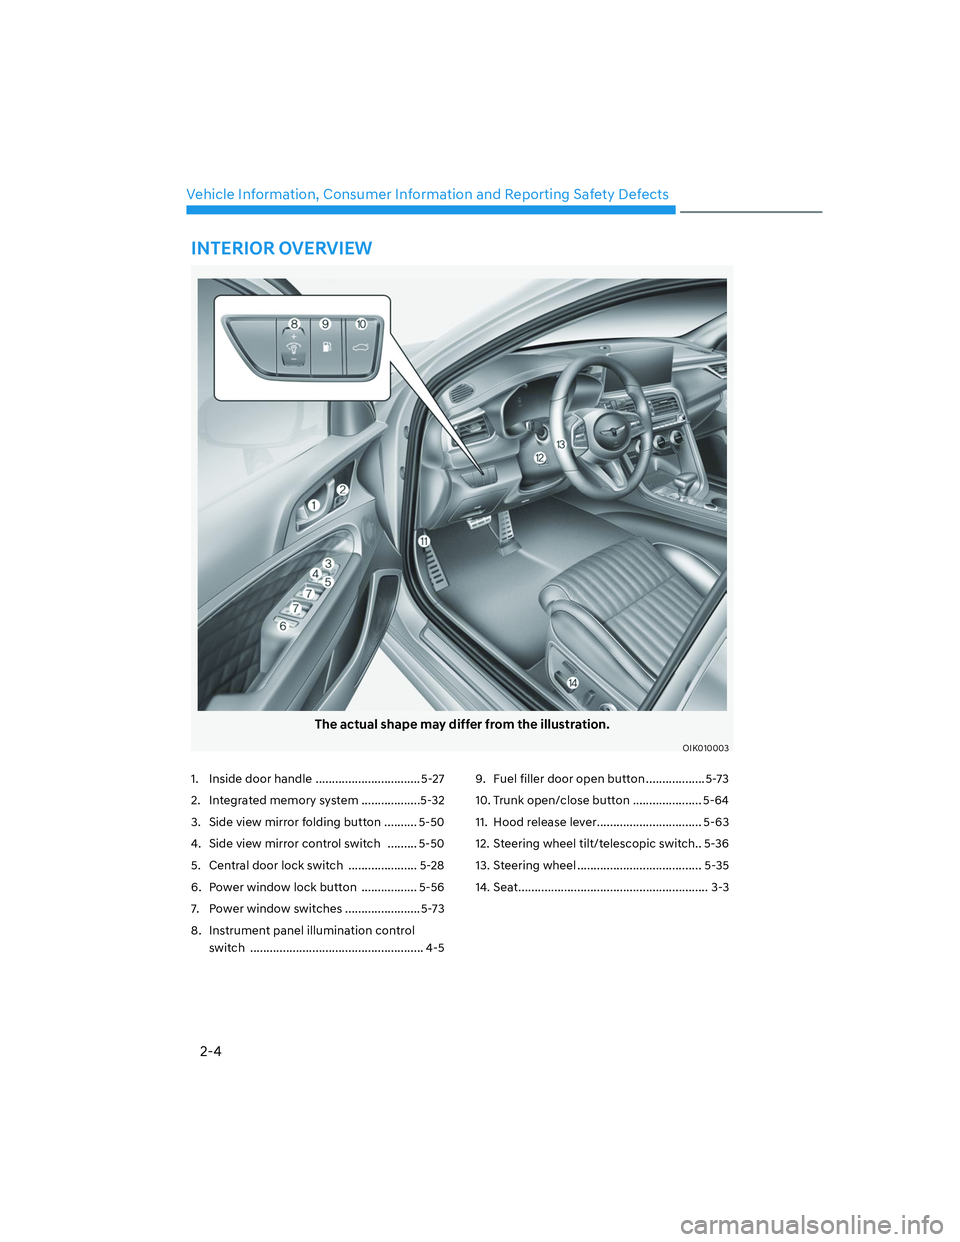 GENESIS G70 2023 User Guide 2-4
Vehicle Information, Consumer Information and Reporting Safety Defects
The actual shape may differ from the illustration.
OIK010003
1.  Inside door handle  ................................ 5-27
2.